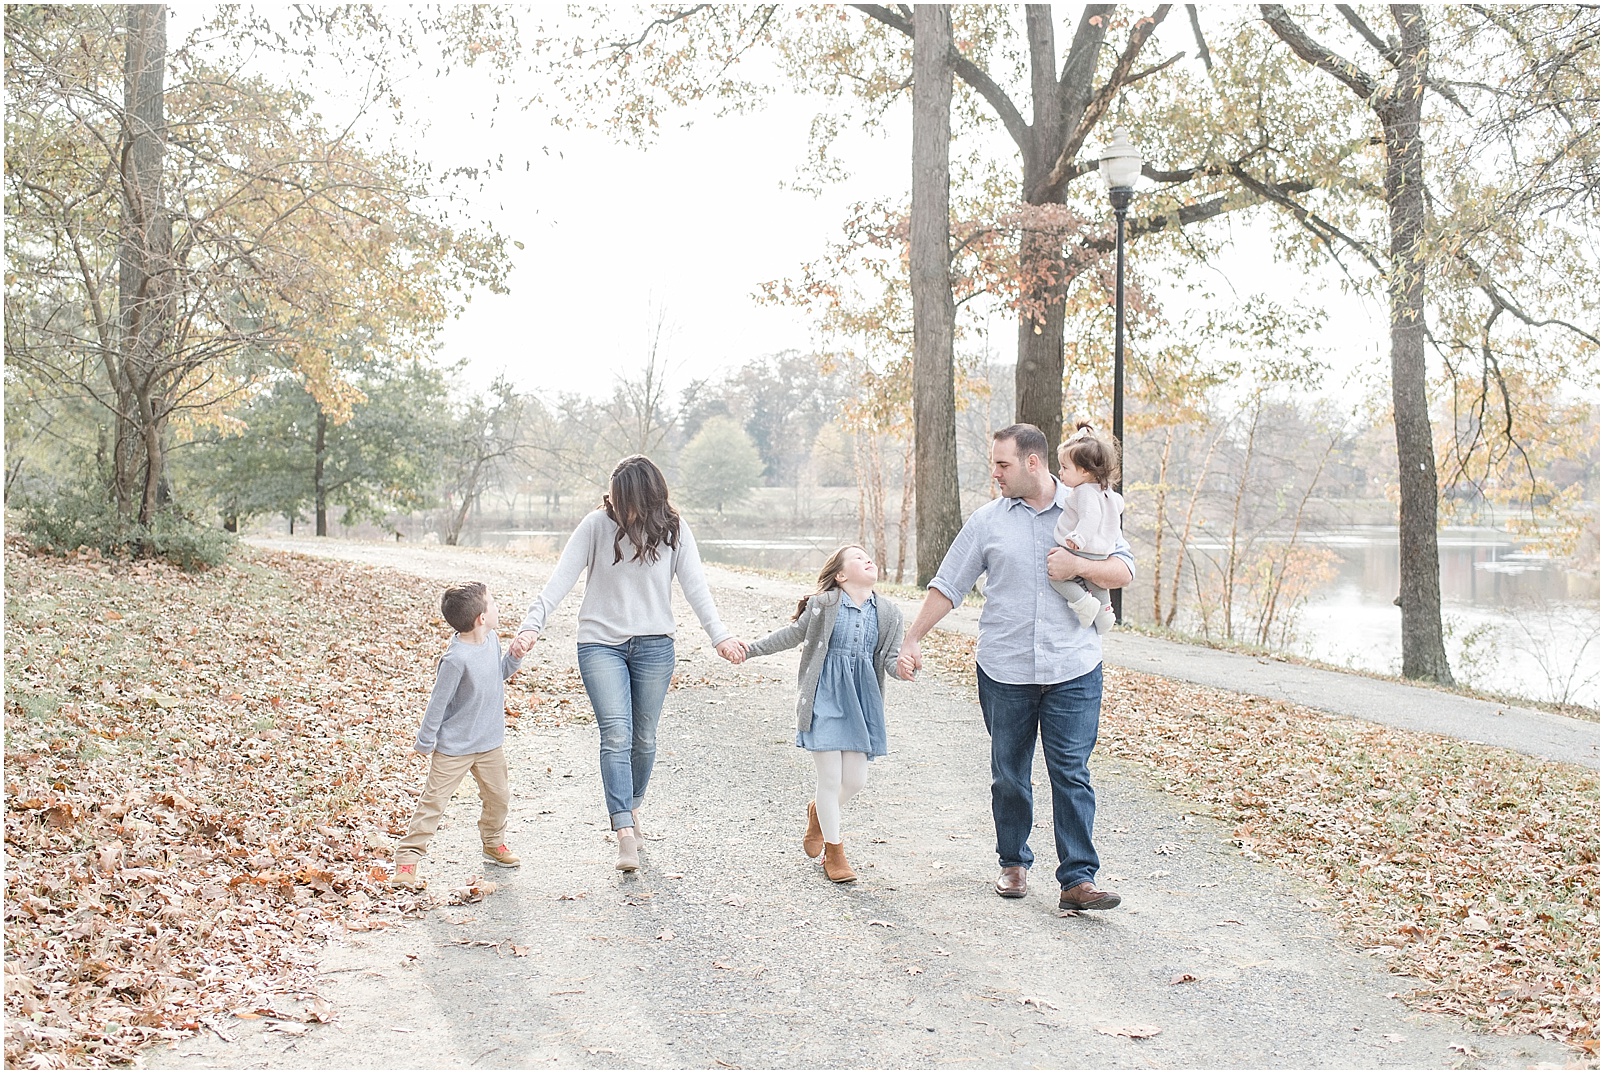 Nothing better than walking hand in hand with your family! Family photographer in Maryland.